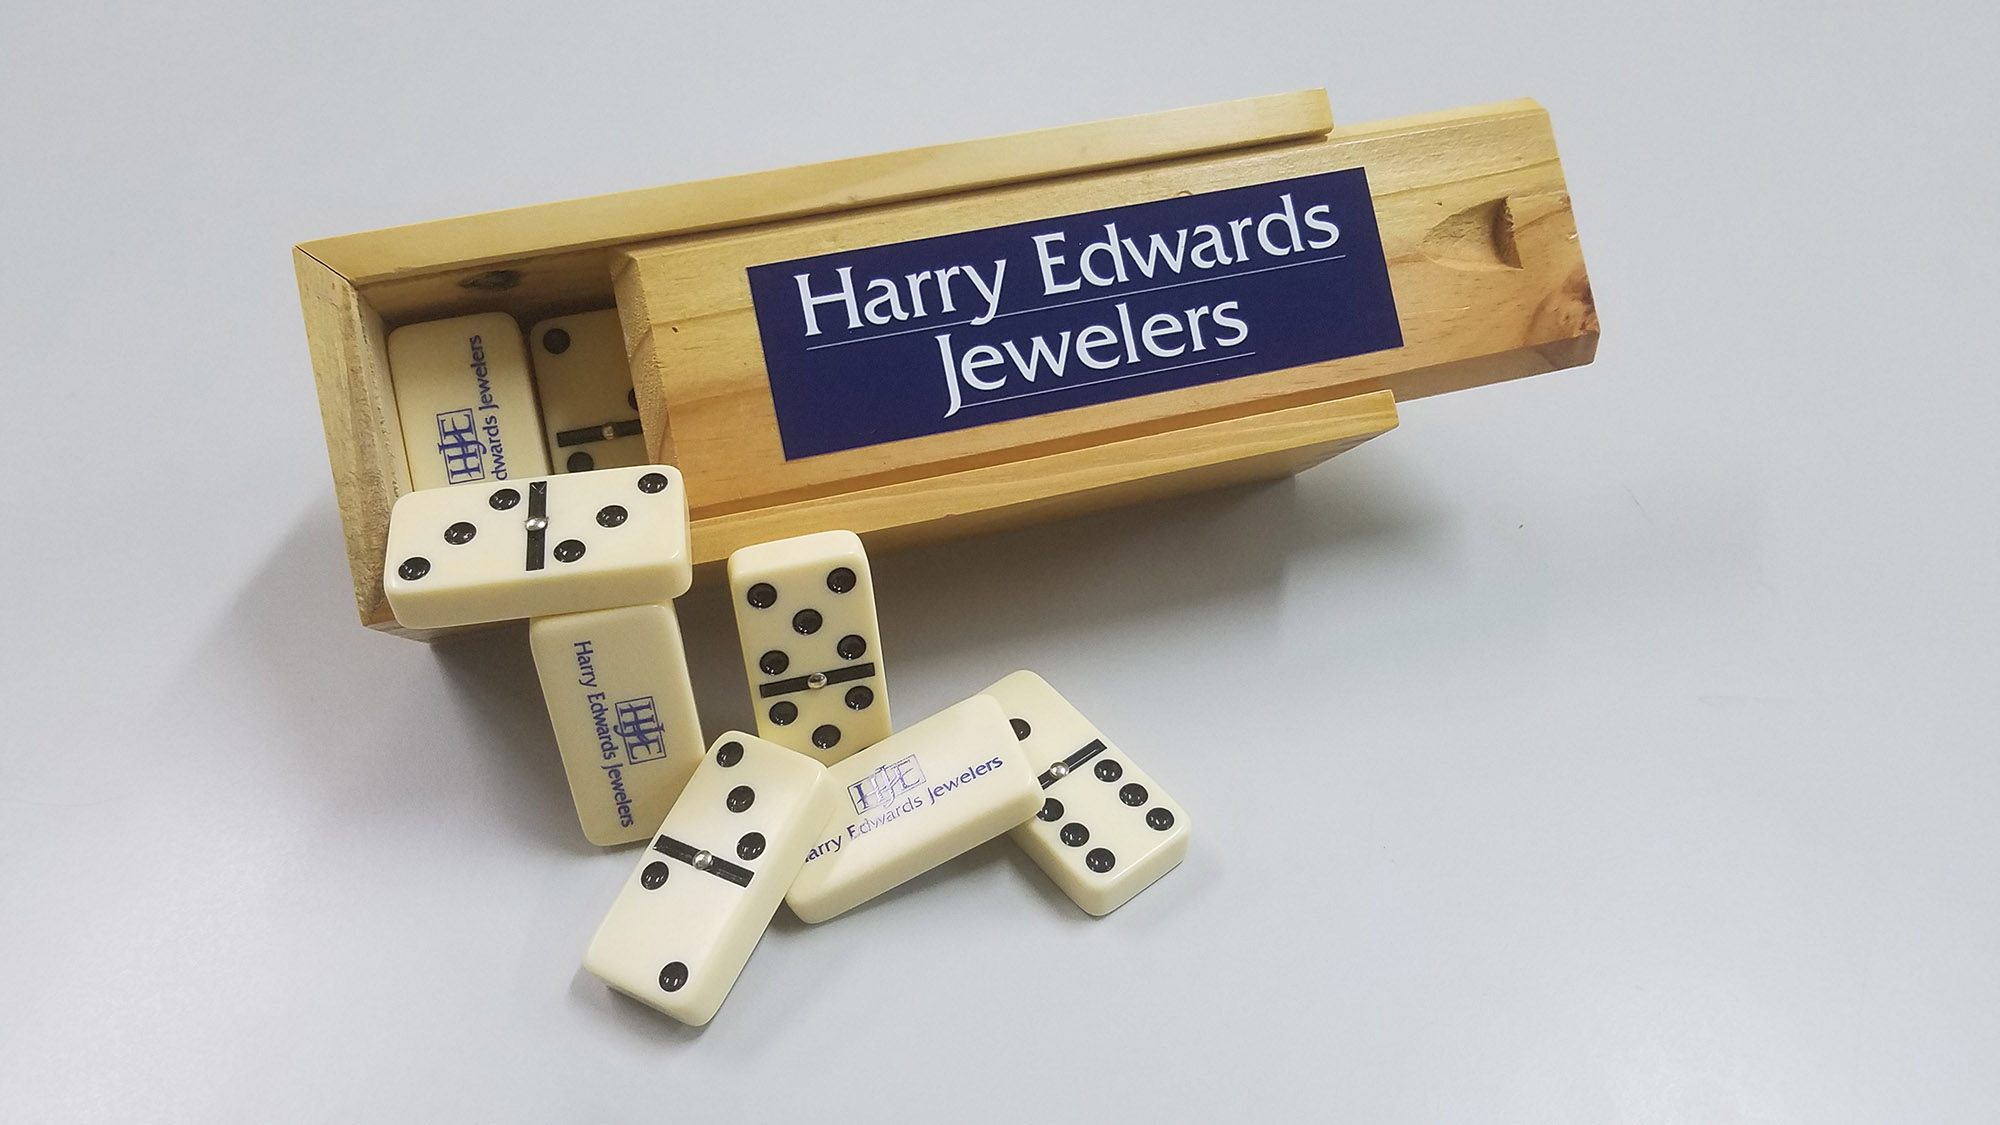 Harry Edwards Jewelers Annual Domino Competition A “Slamming” Good Time